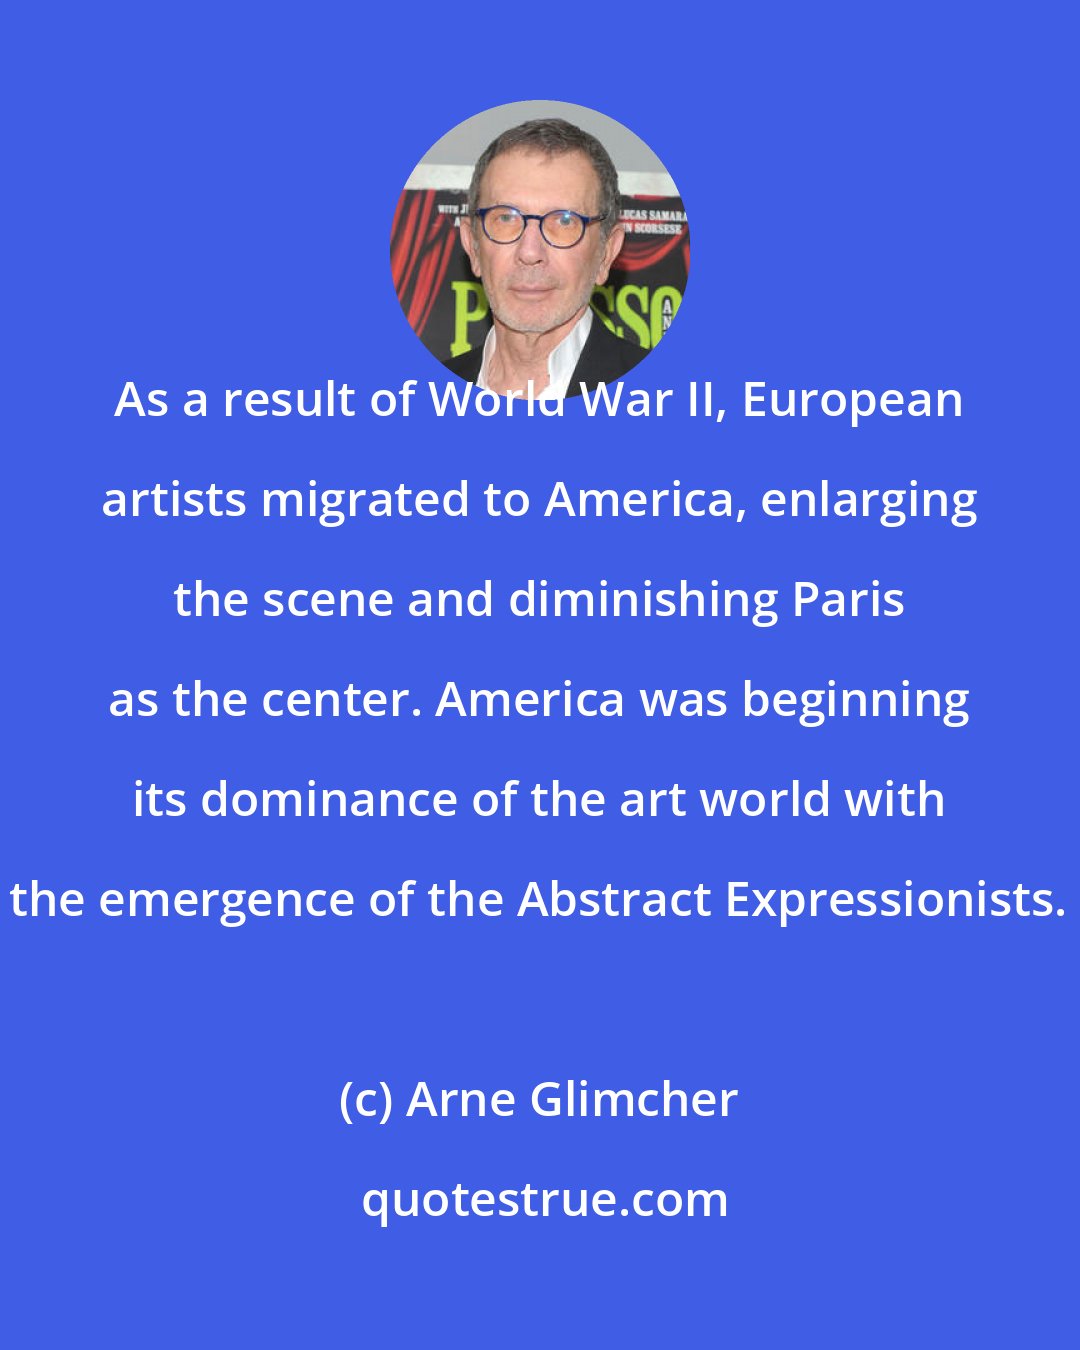 Arne Glimcher: As a result of World War II, European artists migrated to America, enlarging the scene and diminishing Paris as the center. America was beginning its dominance of the art world with the emergence of the Abstract Expressionists.